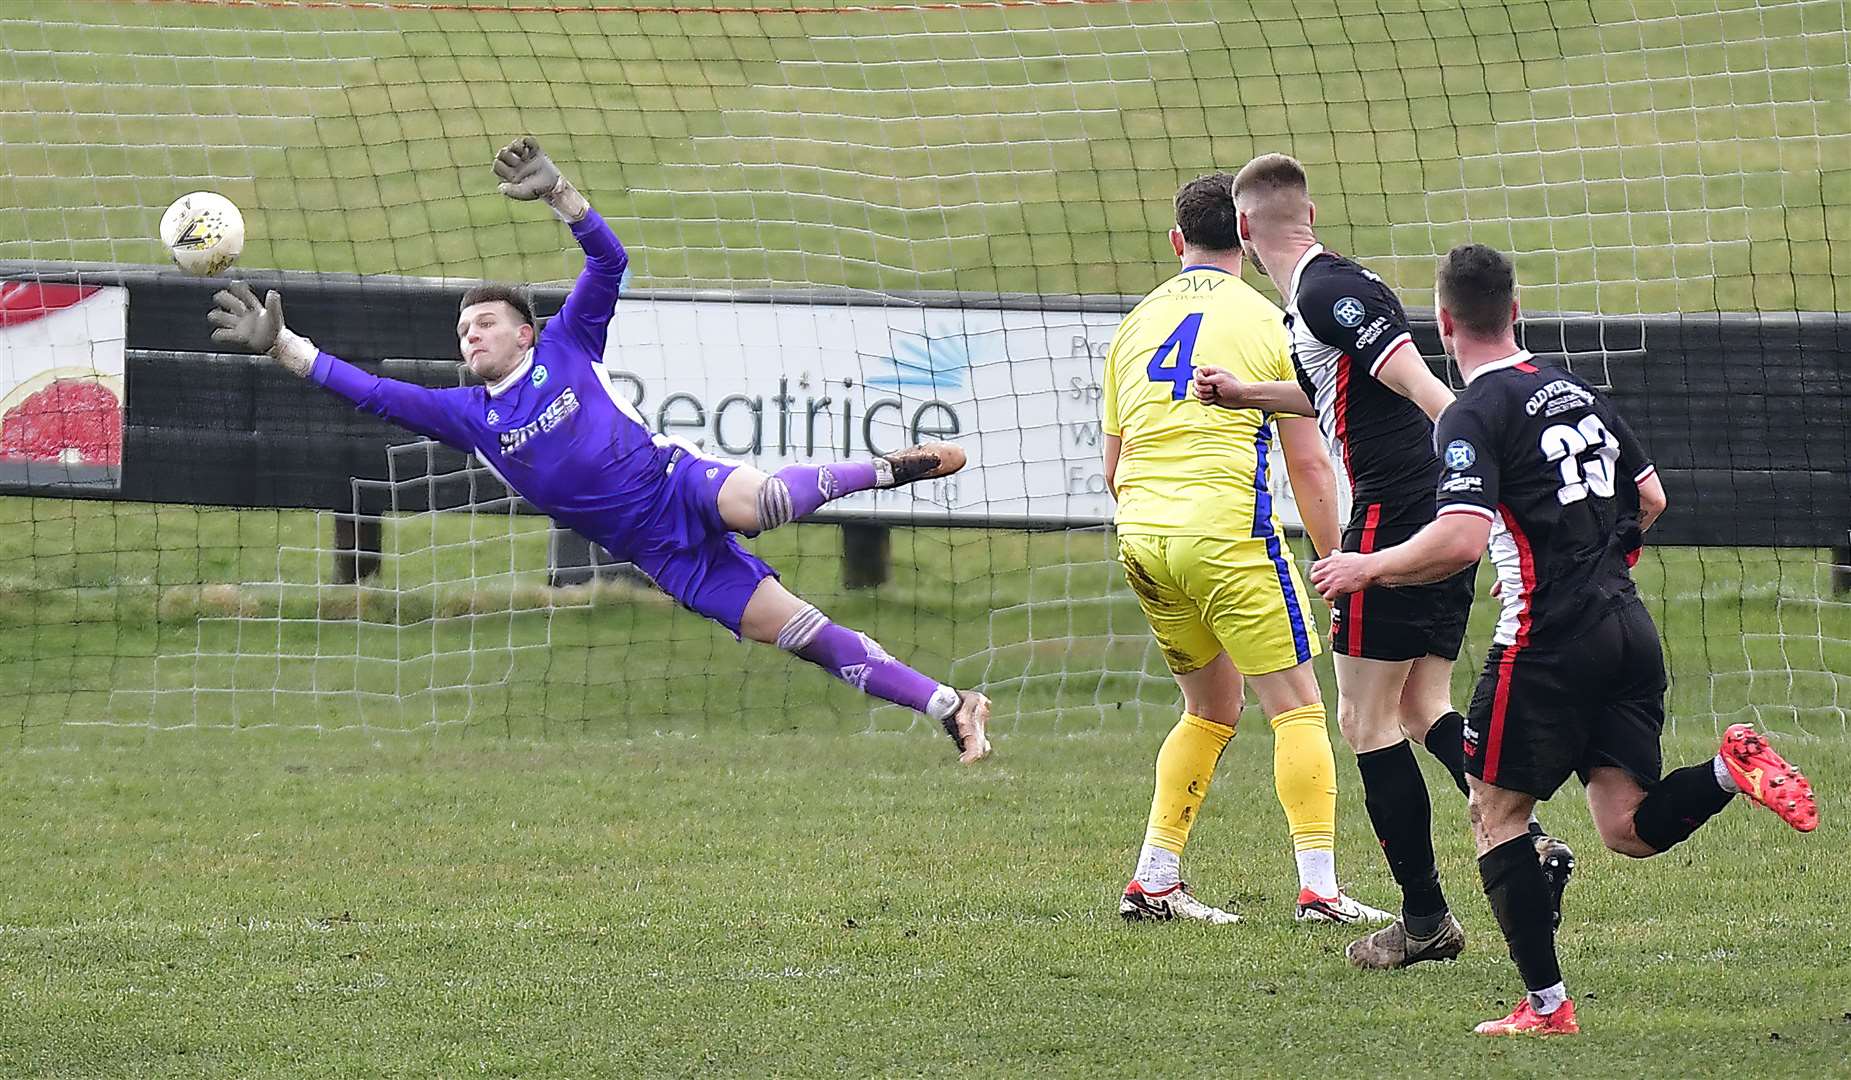 Marc Macgregor watches as his shot beats Buckie keeper Tom Ritchie for the opening goal at Harmsworth Park. Picture: Mel Roger